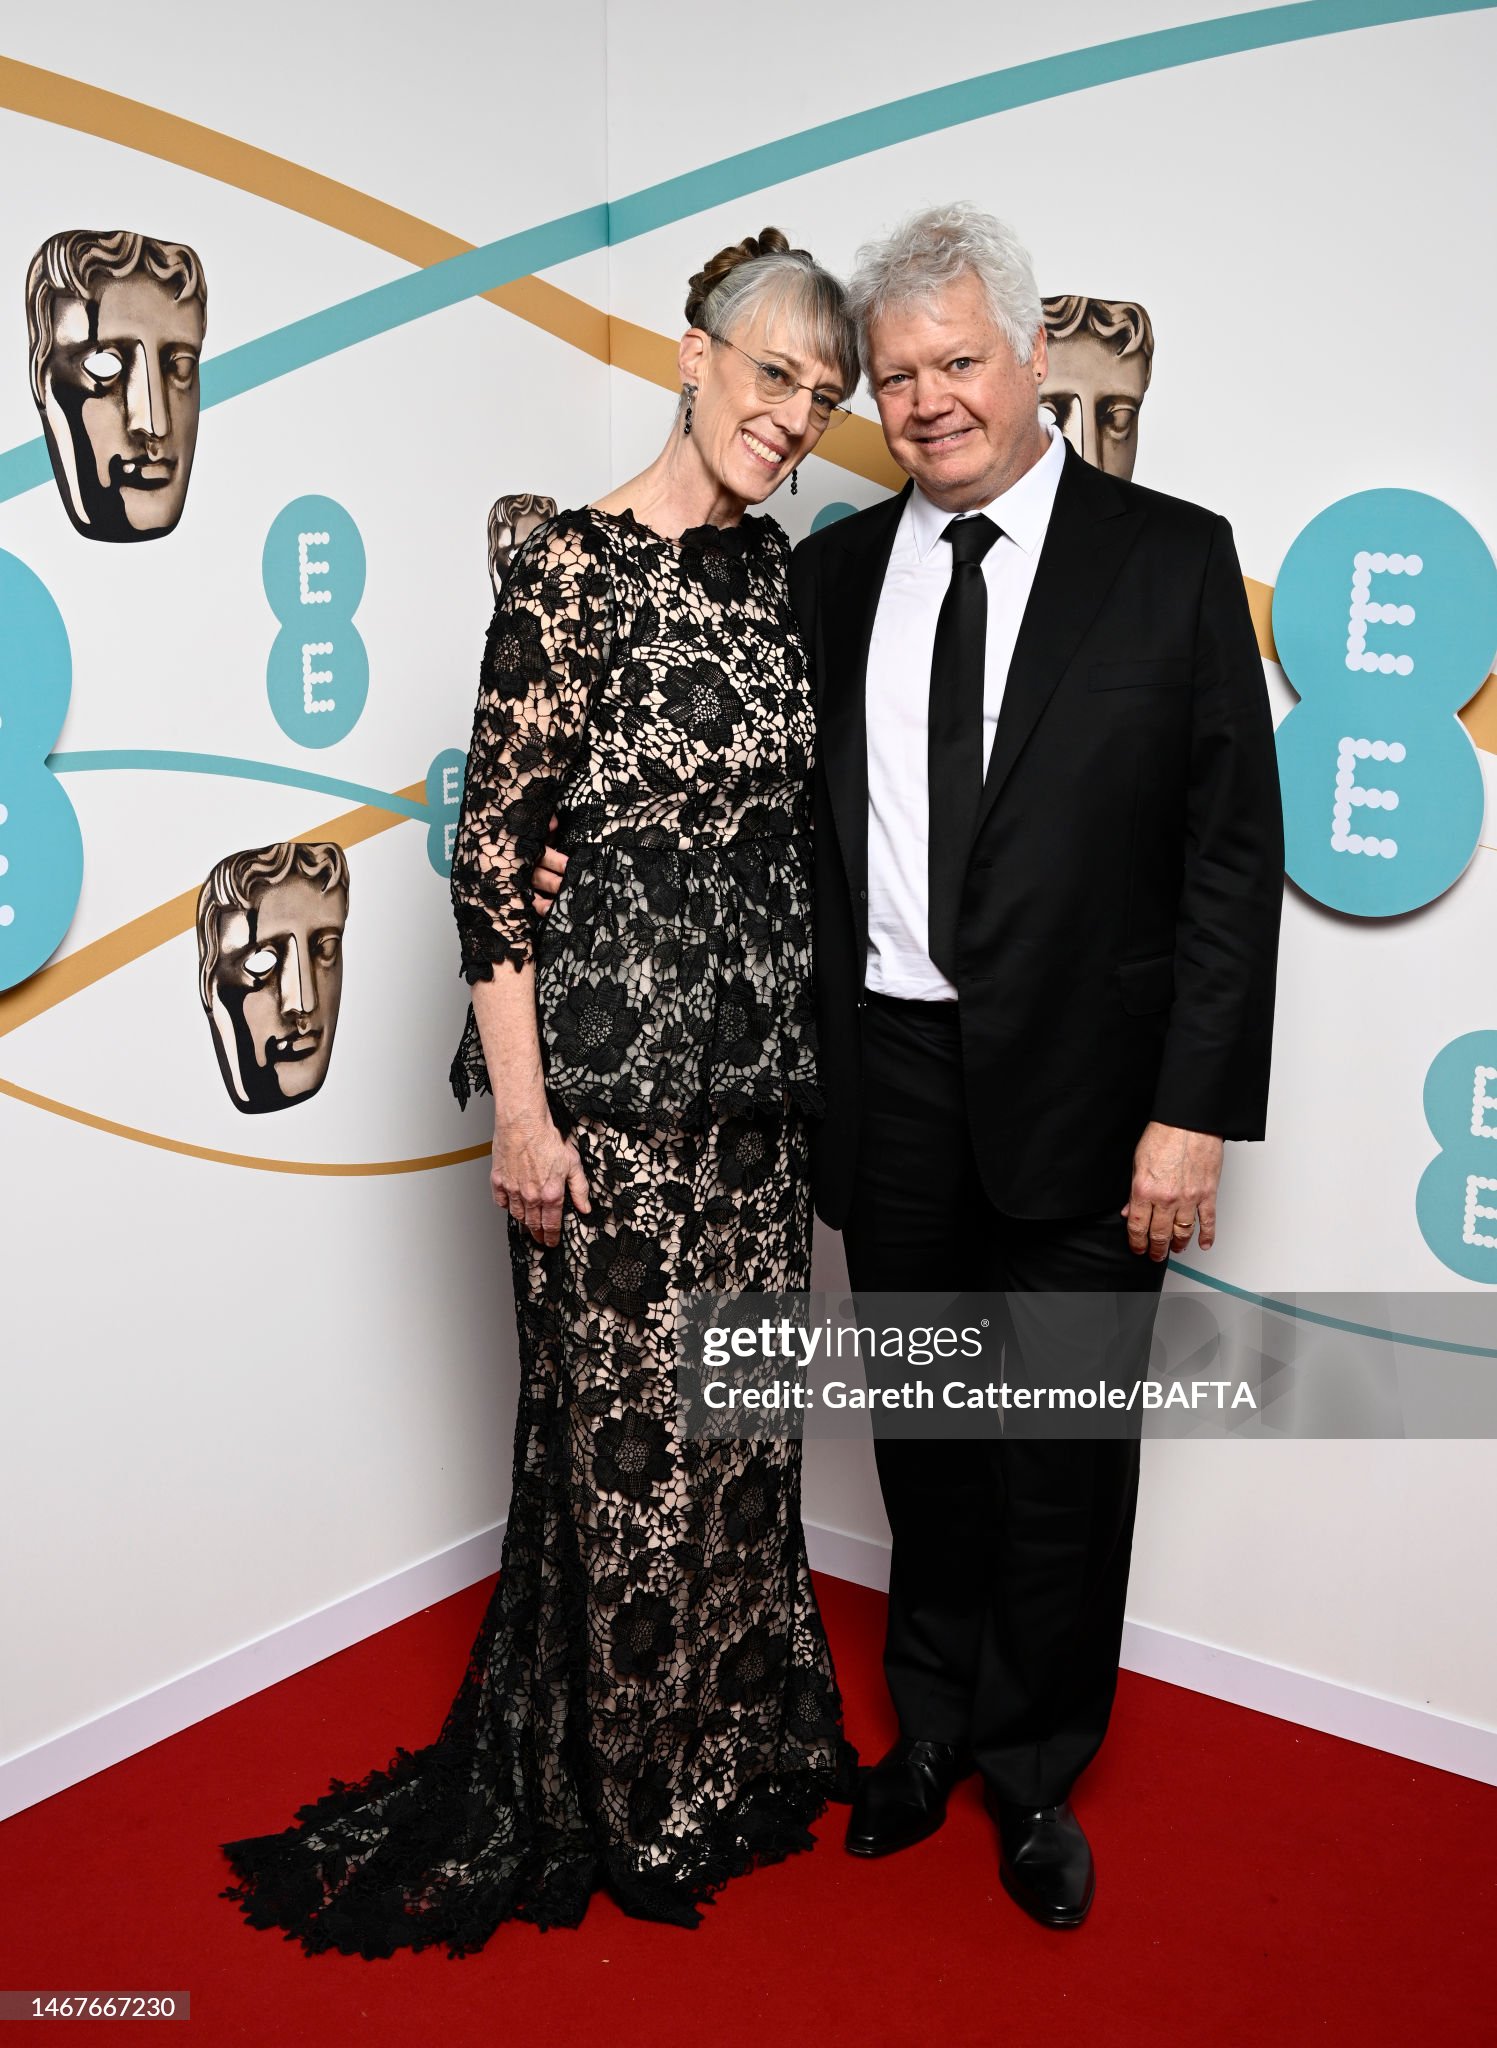 gwendolyn-yates-whittle-and-a-guest-attend-the-ee-bafta-film-awards-2023-at-the-royal-festival.jpg